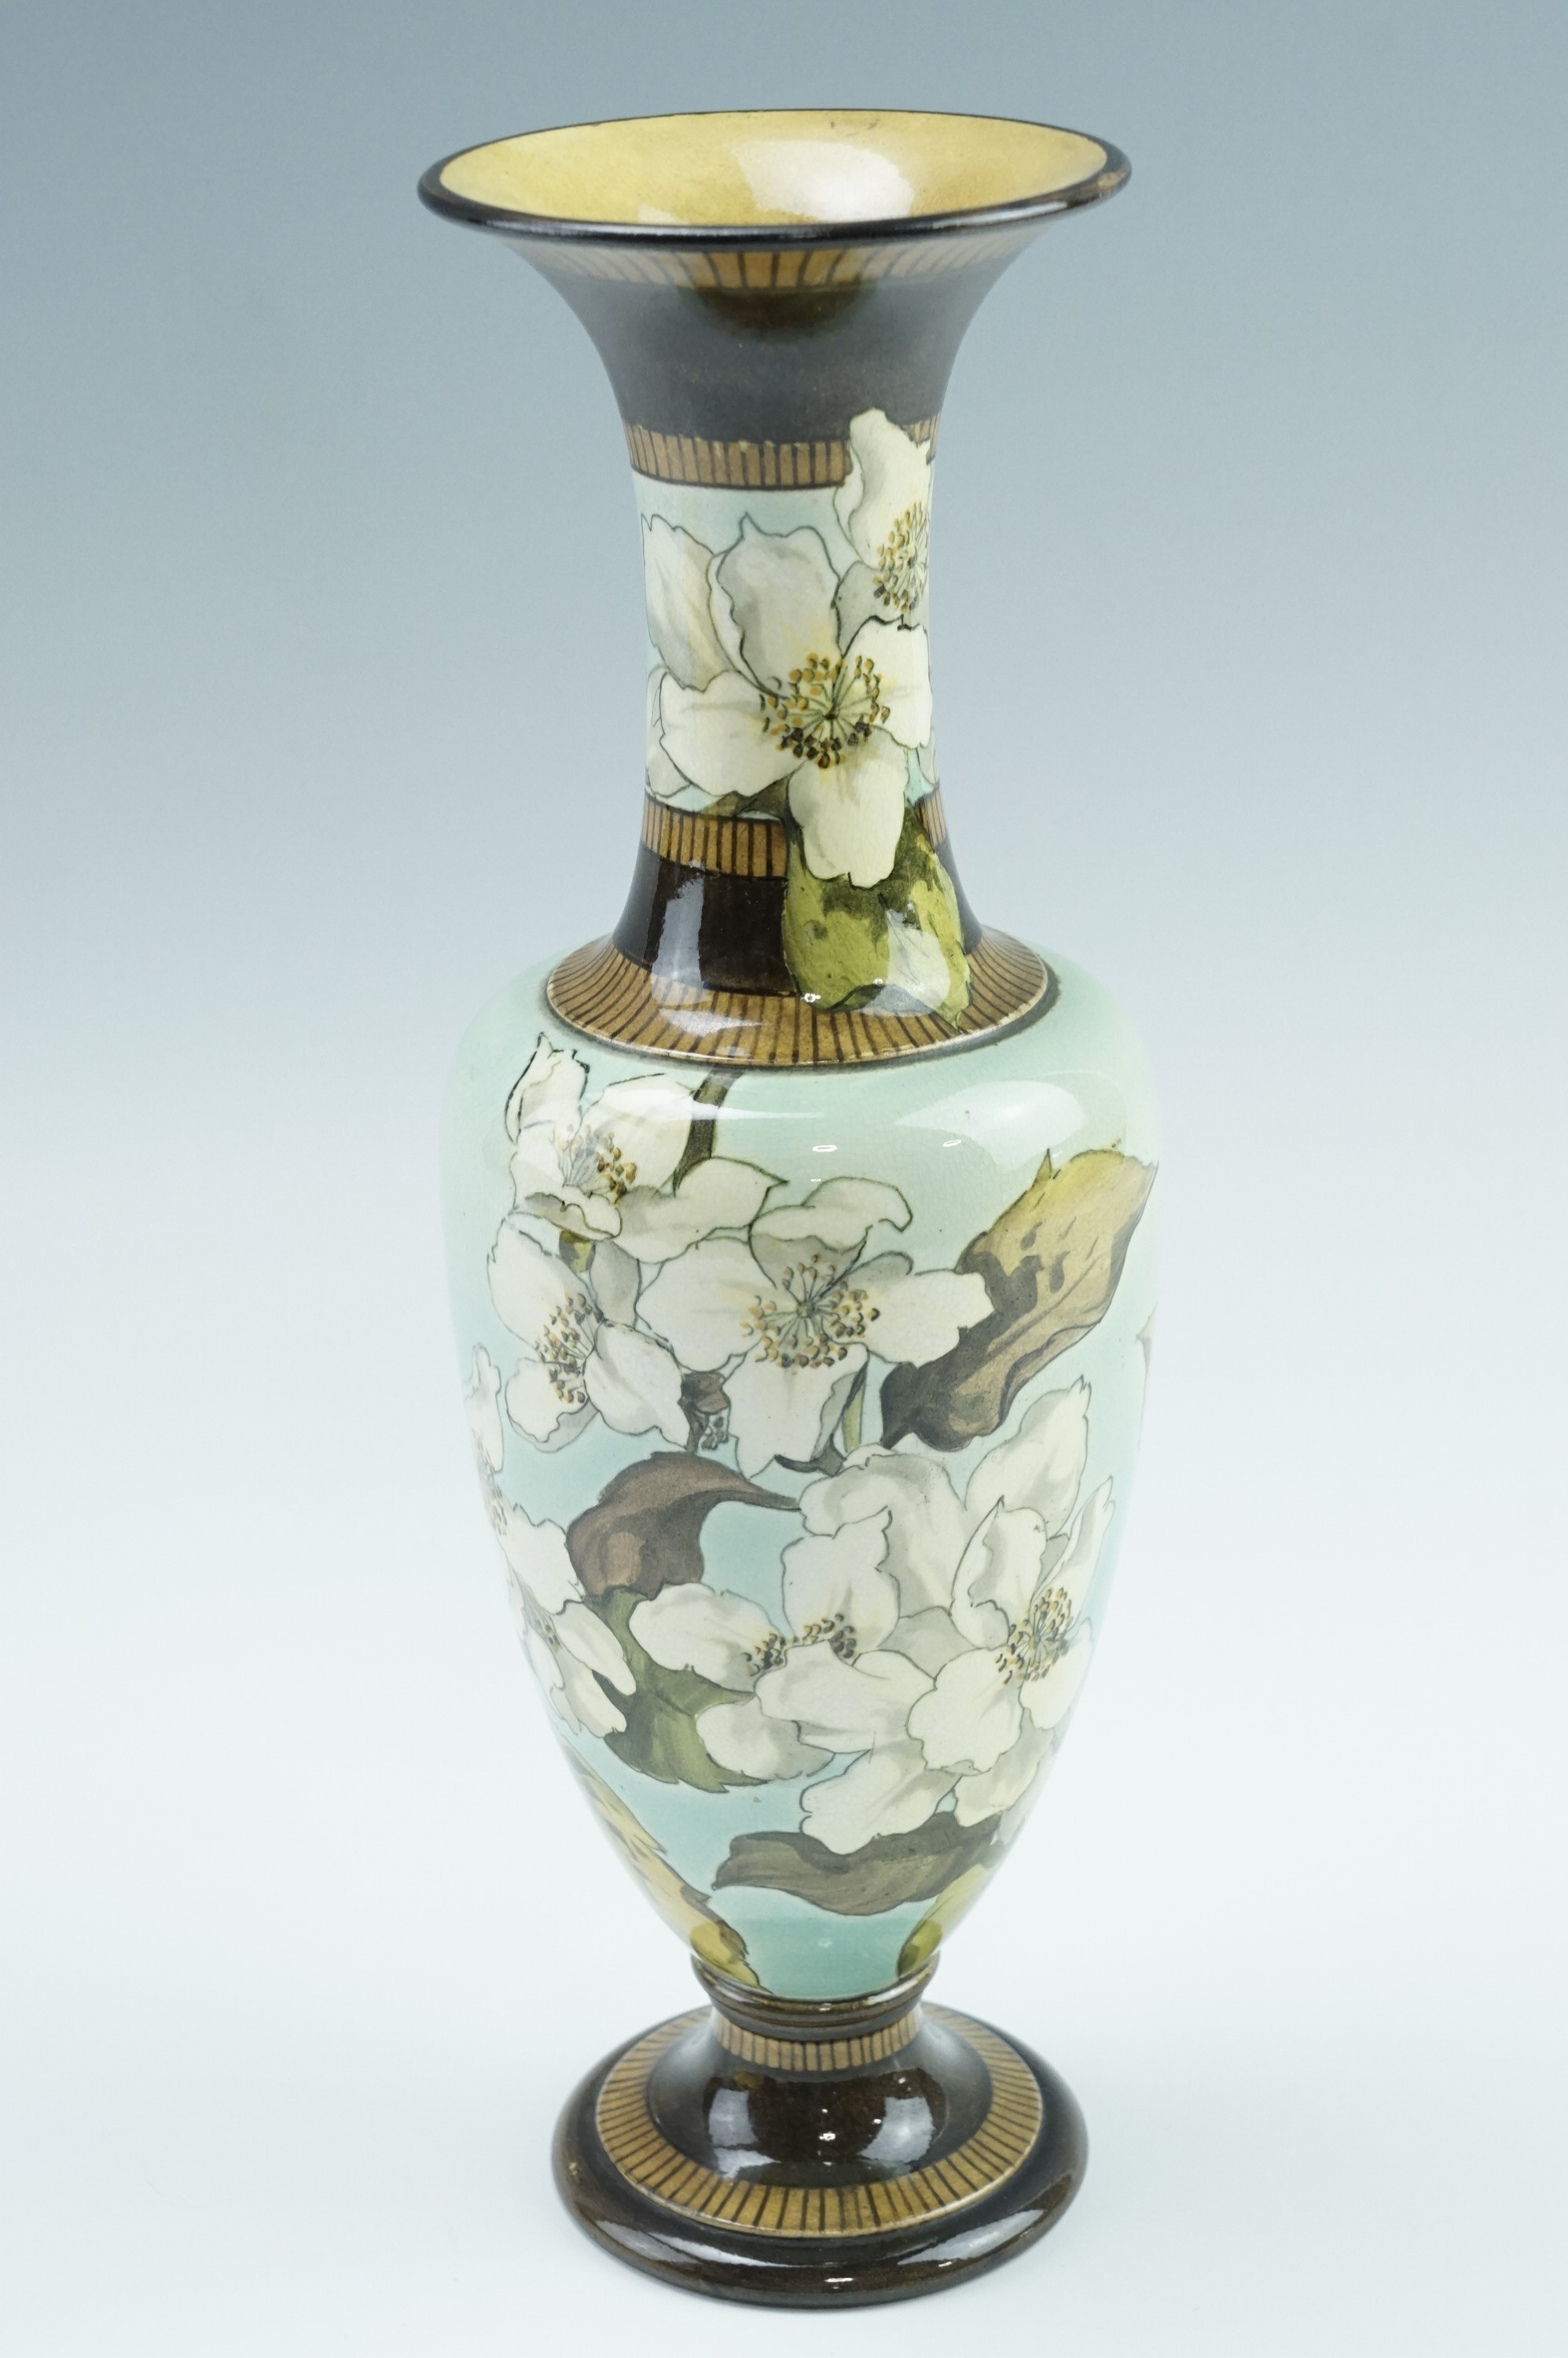 A late 19th Century Doulton Lambeth Faience vase, of slender urn form having an elongated neck and - Image 2 of 3